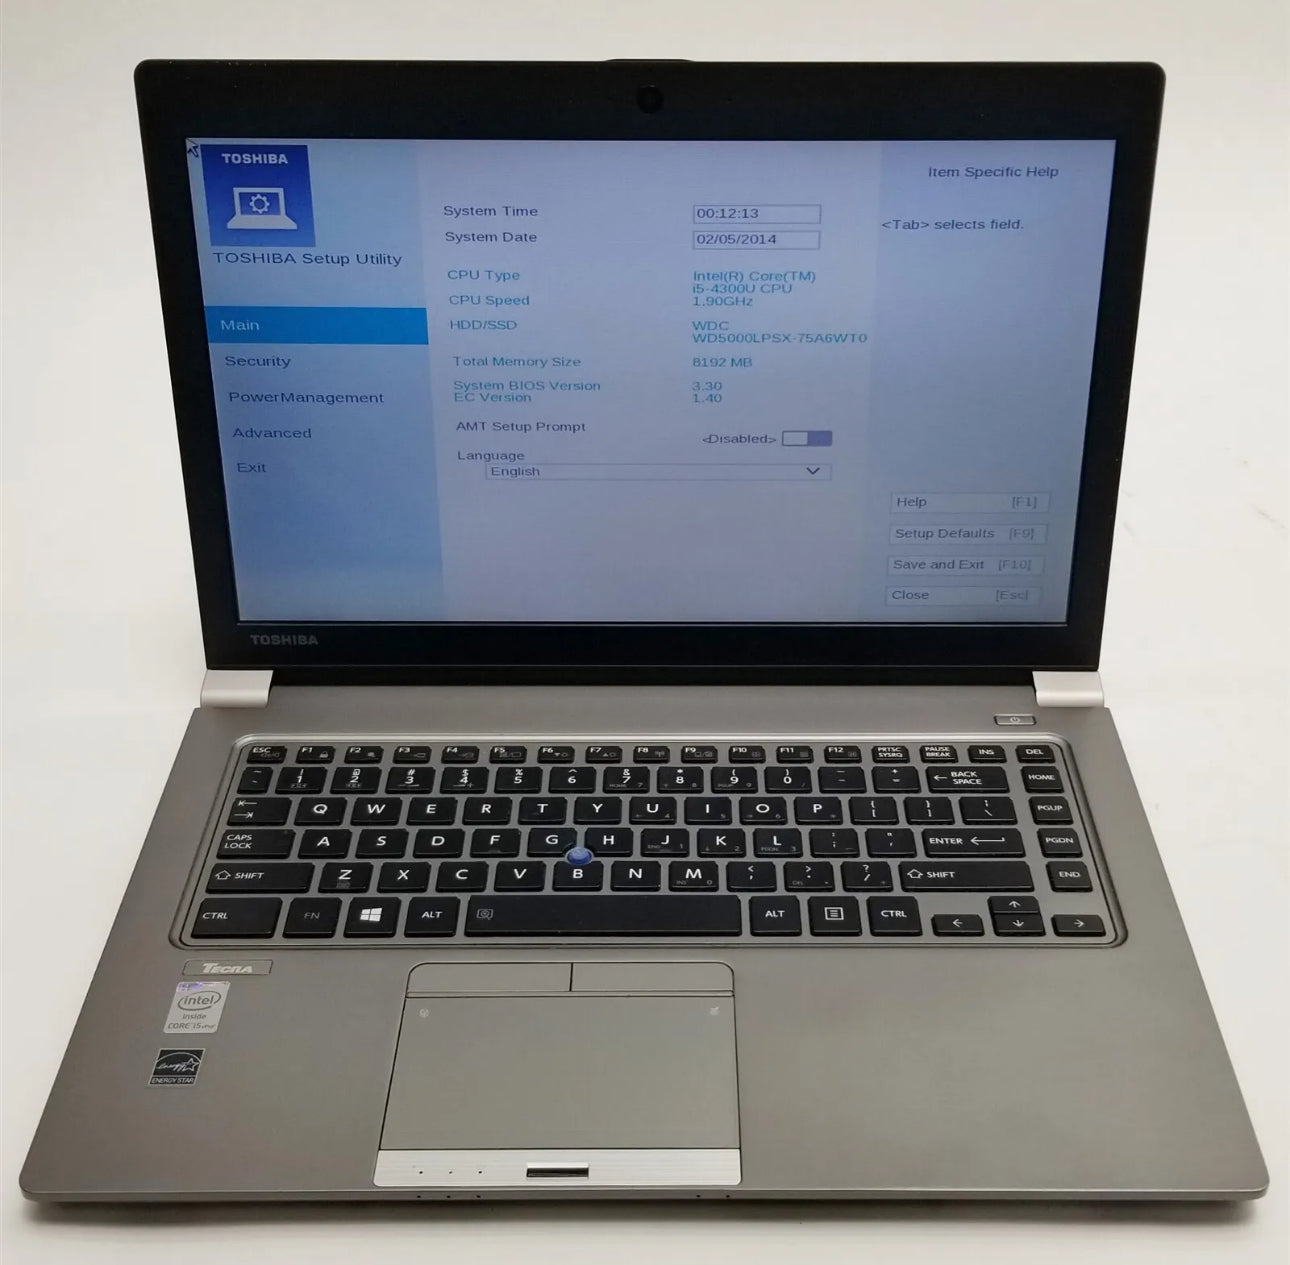 Toshiba Tecra Z30-C 13 i5-6300U 2.4GHz 8GB RAM 128GB SSD (NO OS) charger included